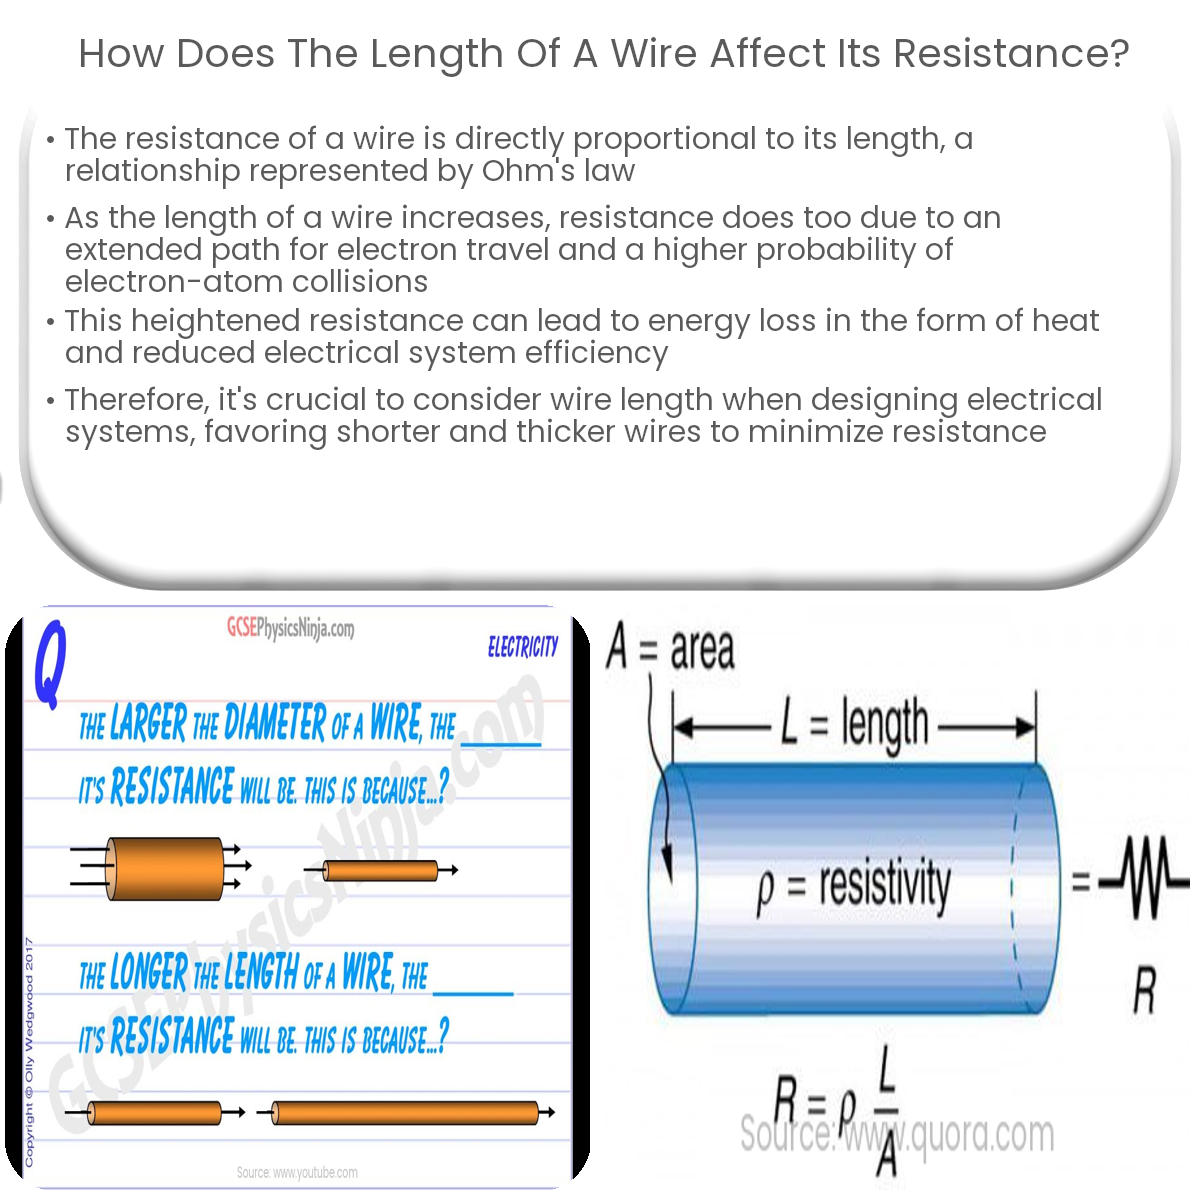 How does the length of a wire affect its resistance?